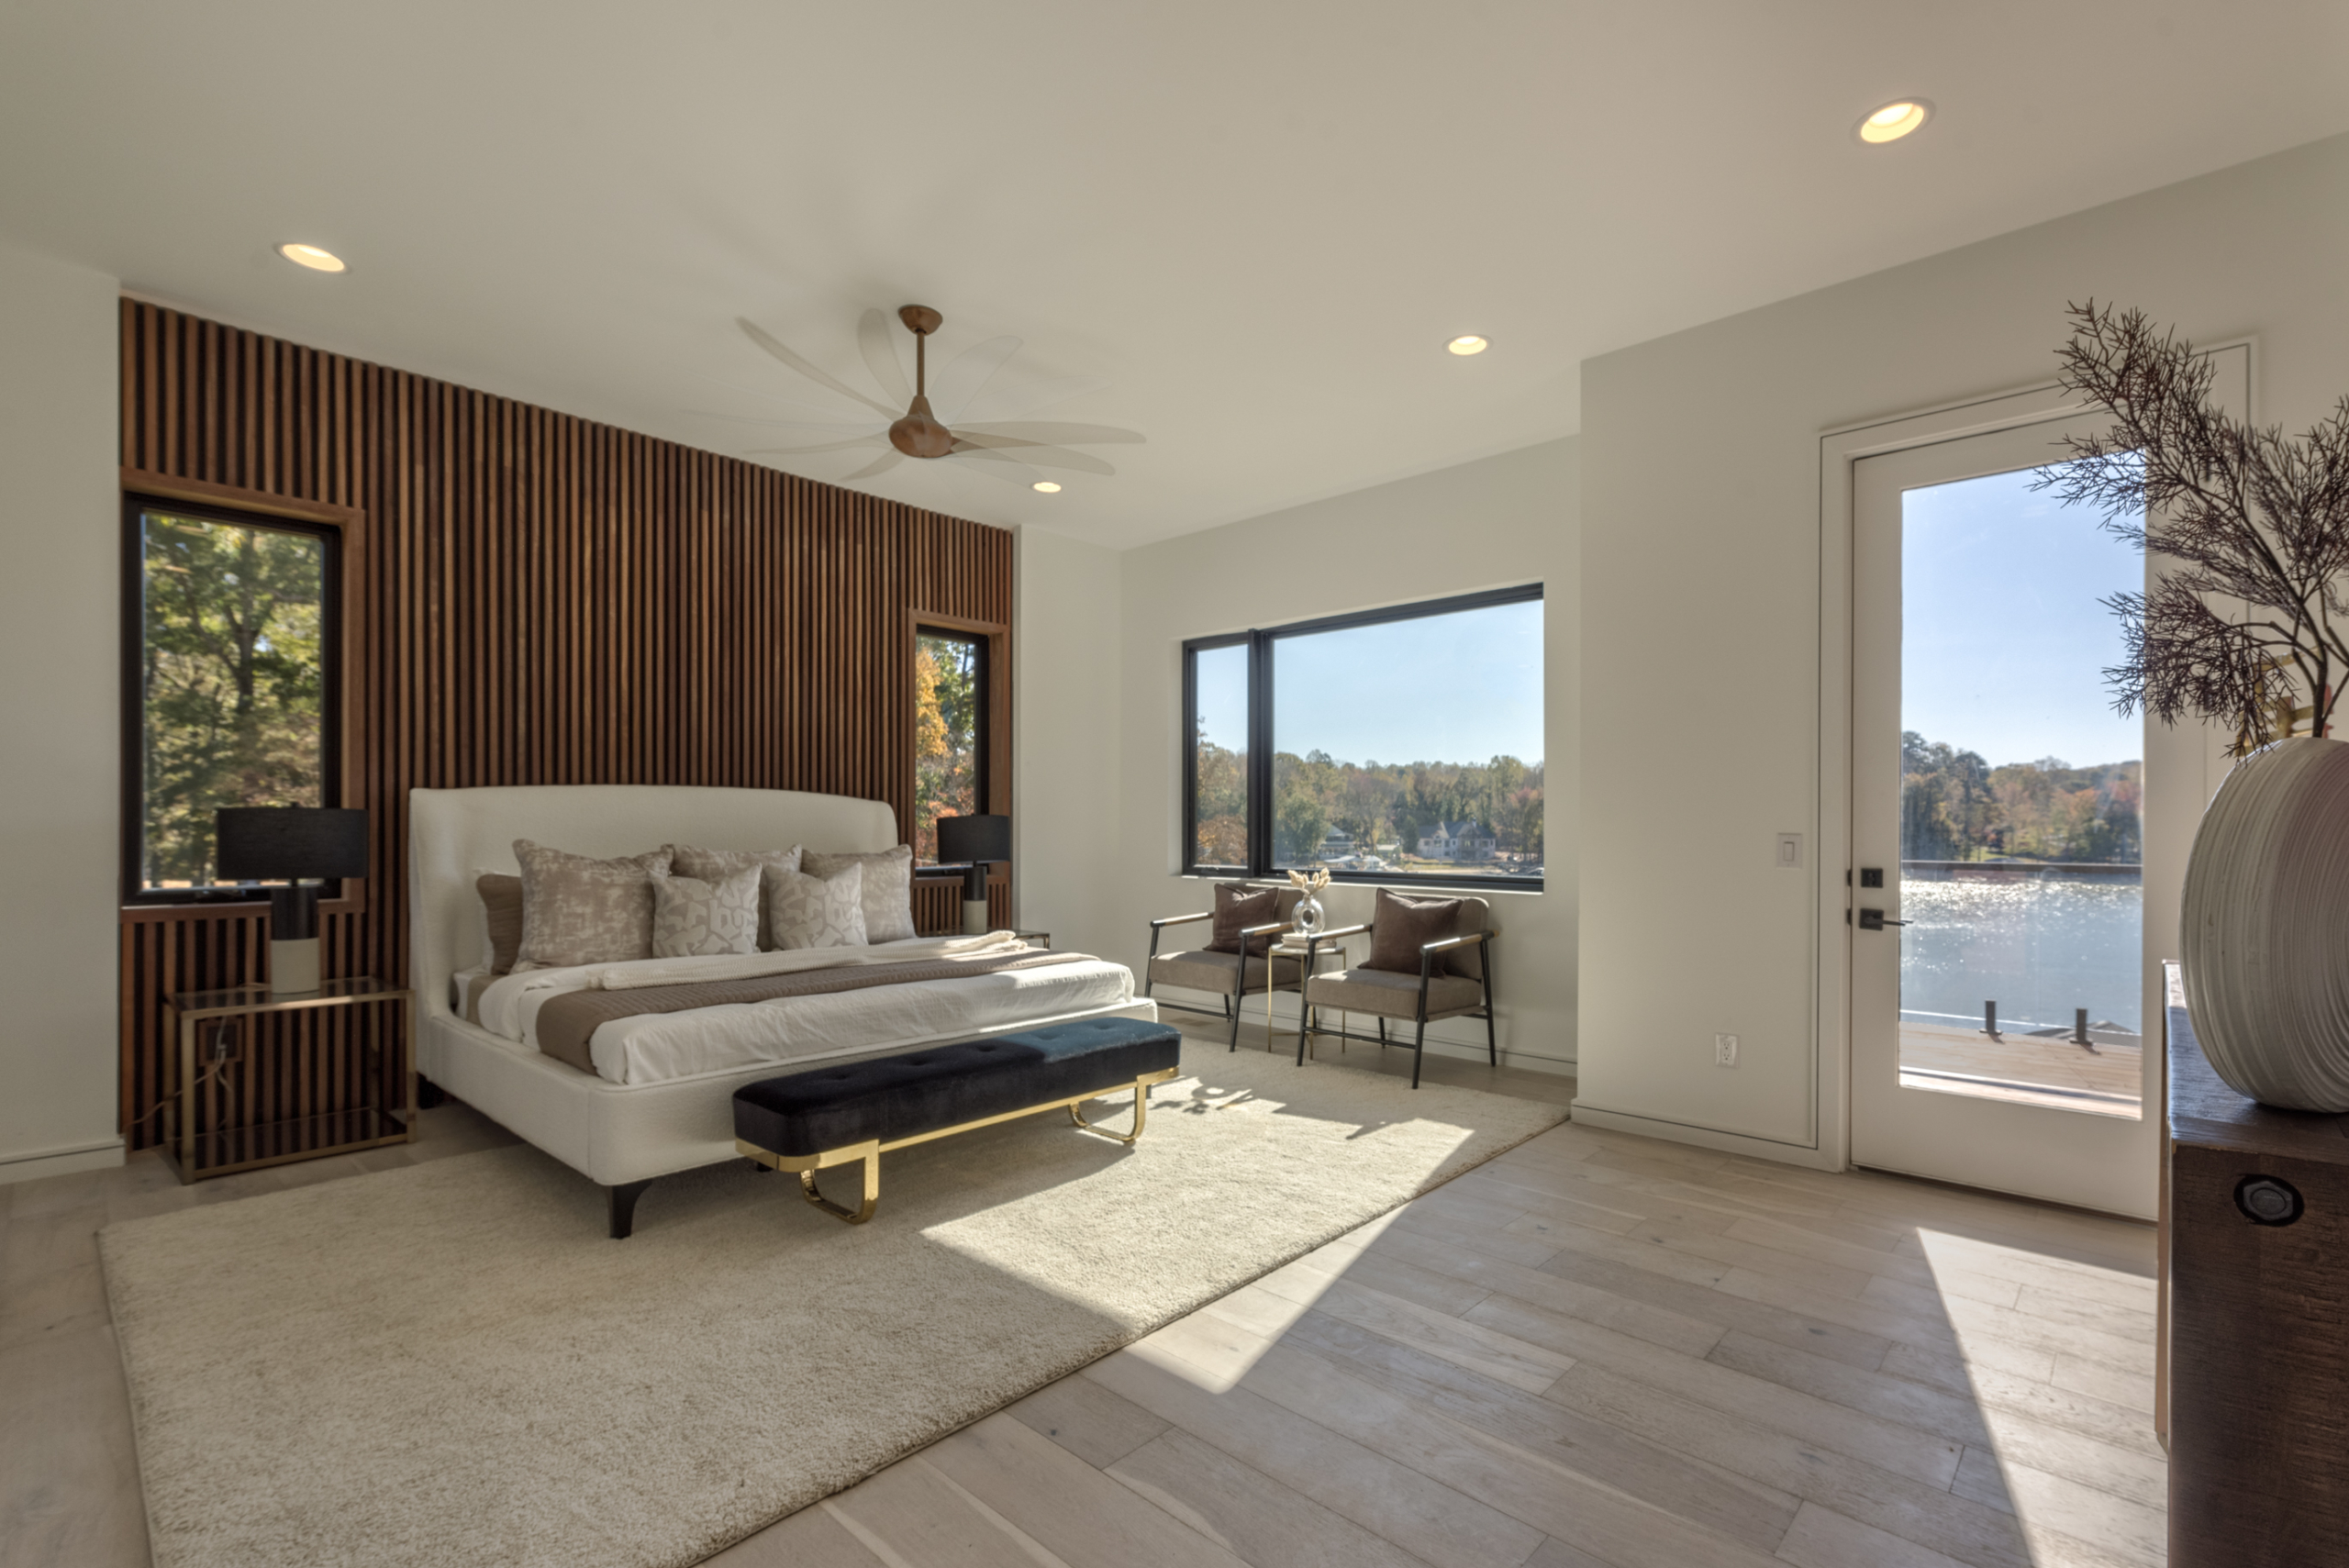 Bedroom with outdoor access, seating area, and cumaru wood detail wall